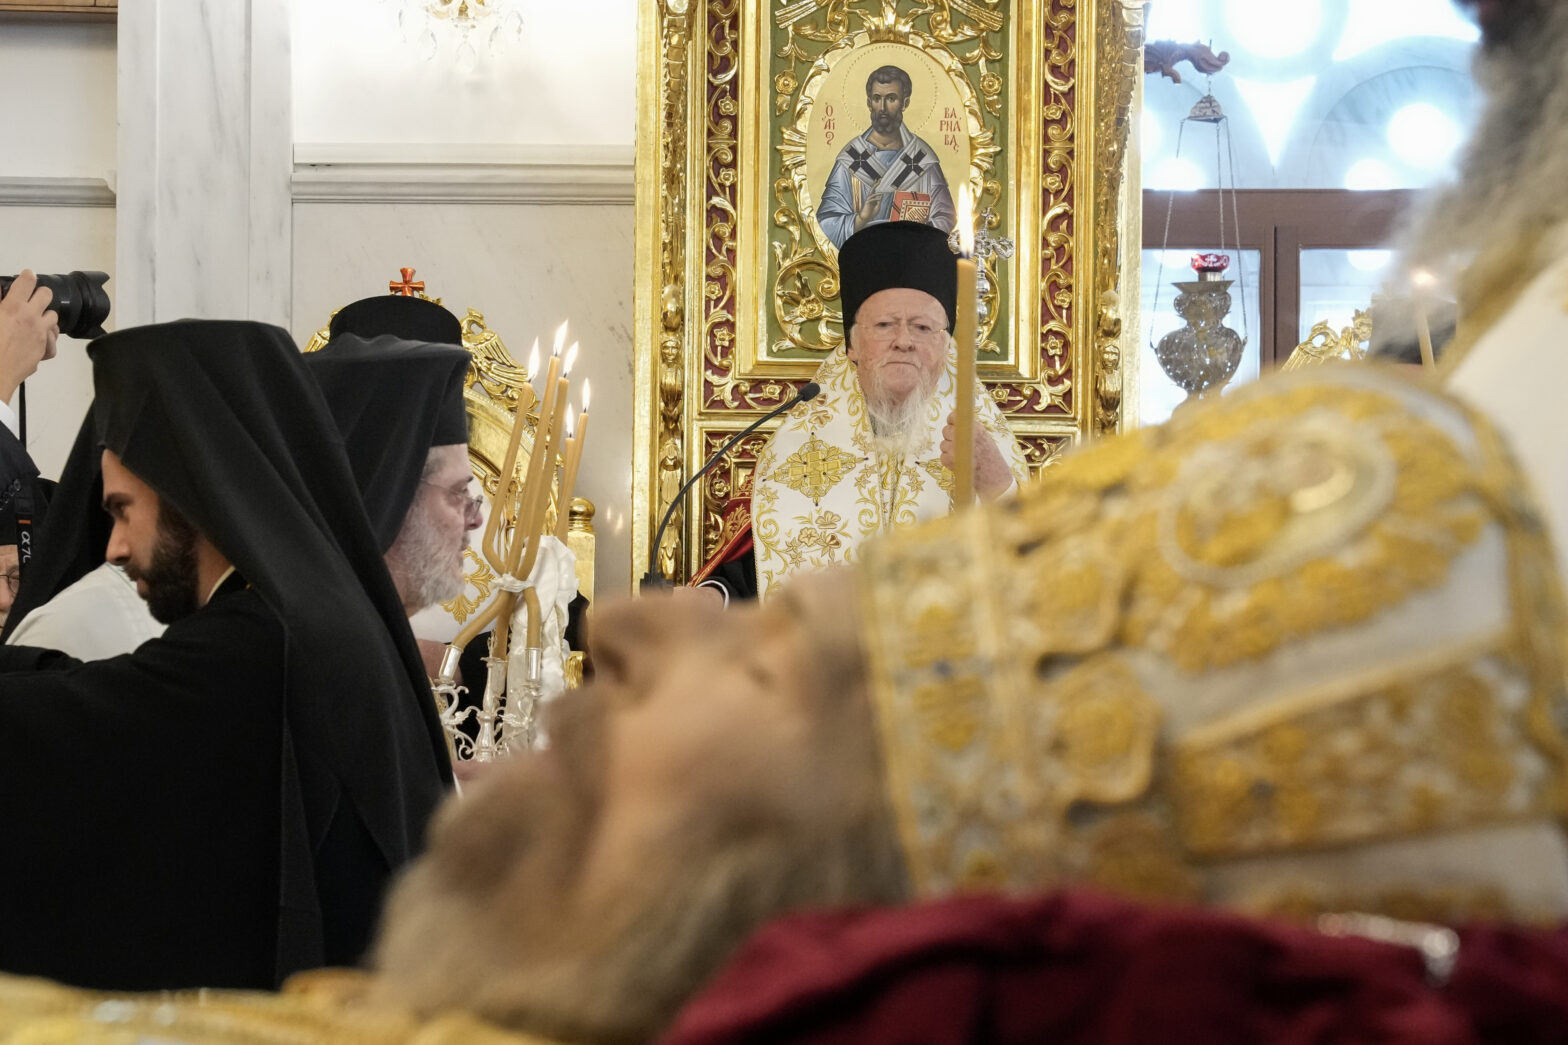 The leader of the world's Orthodox Christians Patriarch Bartholomew presides over the funeral ceremony of the late Head of Cyprus' Orthodox Church, Archbishop Chrysostomos II, at Saint Barnabas Cathedral, in Nicosia, Cyprus, Saturday, Nov. 12, 2022. The outspoken Chrysostomos whose forays into the country's complex politics and finances fired up supporters and detractors alike, died Monday at the age of 81. (AP Photo/Petros Karadjias)